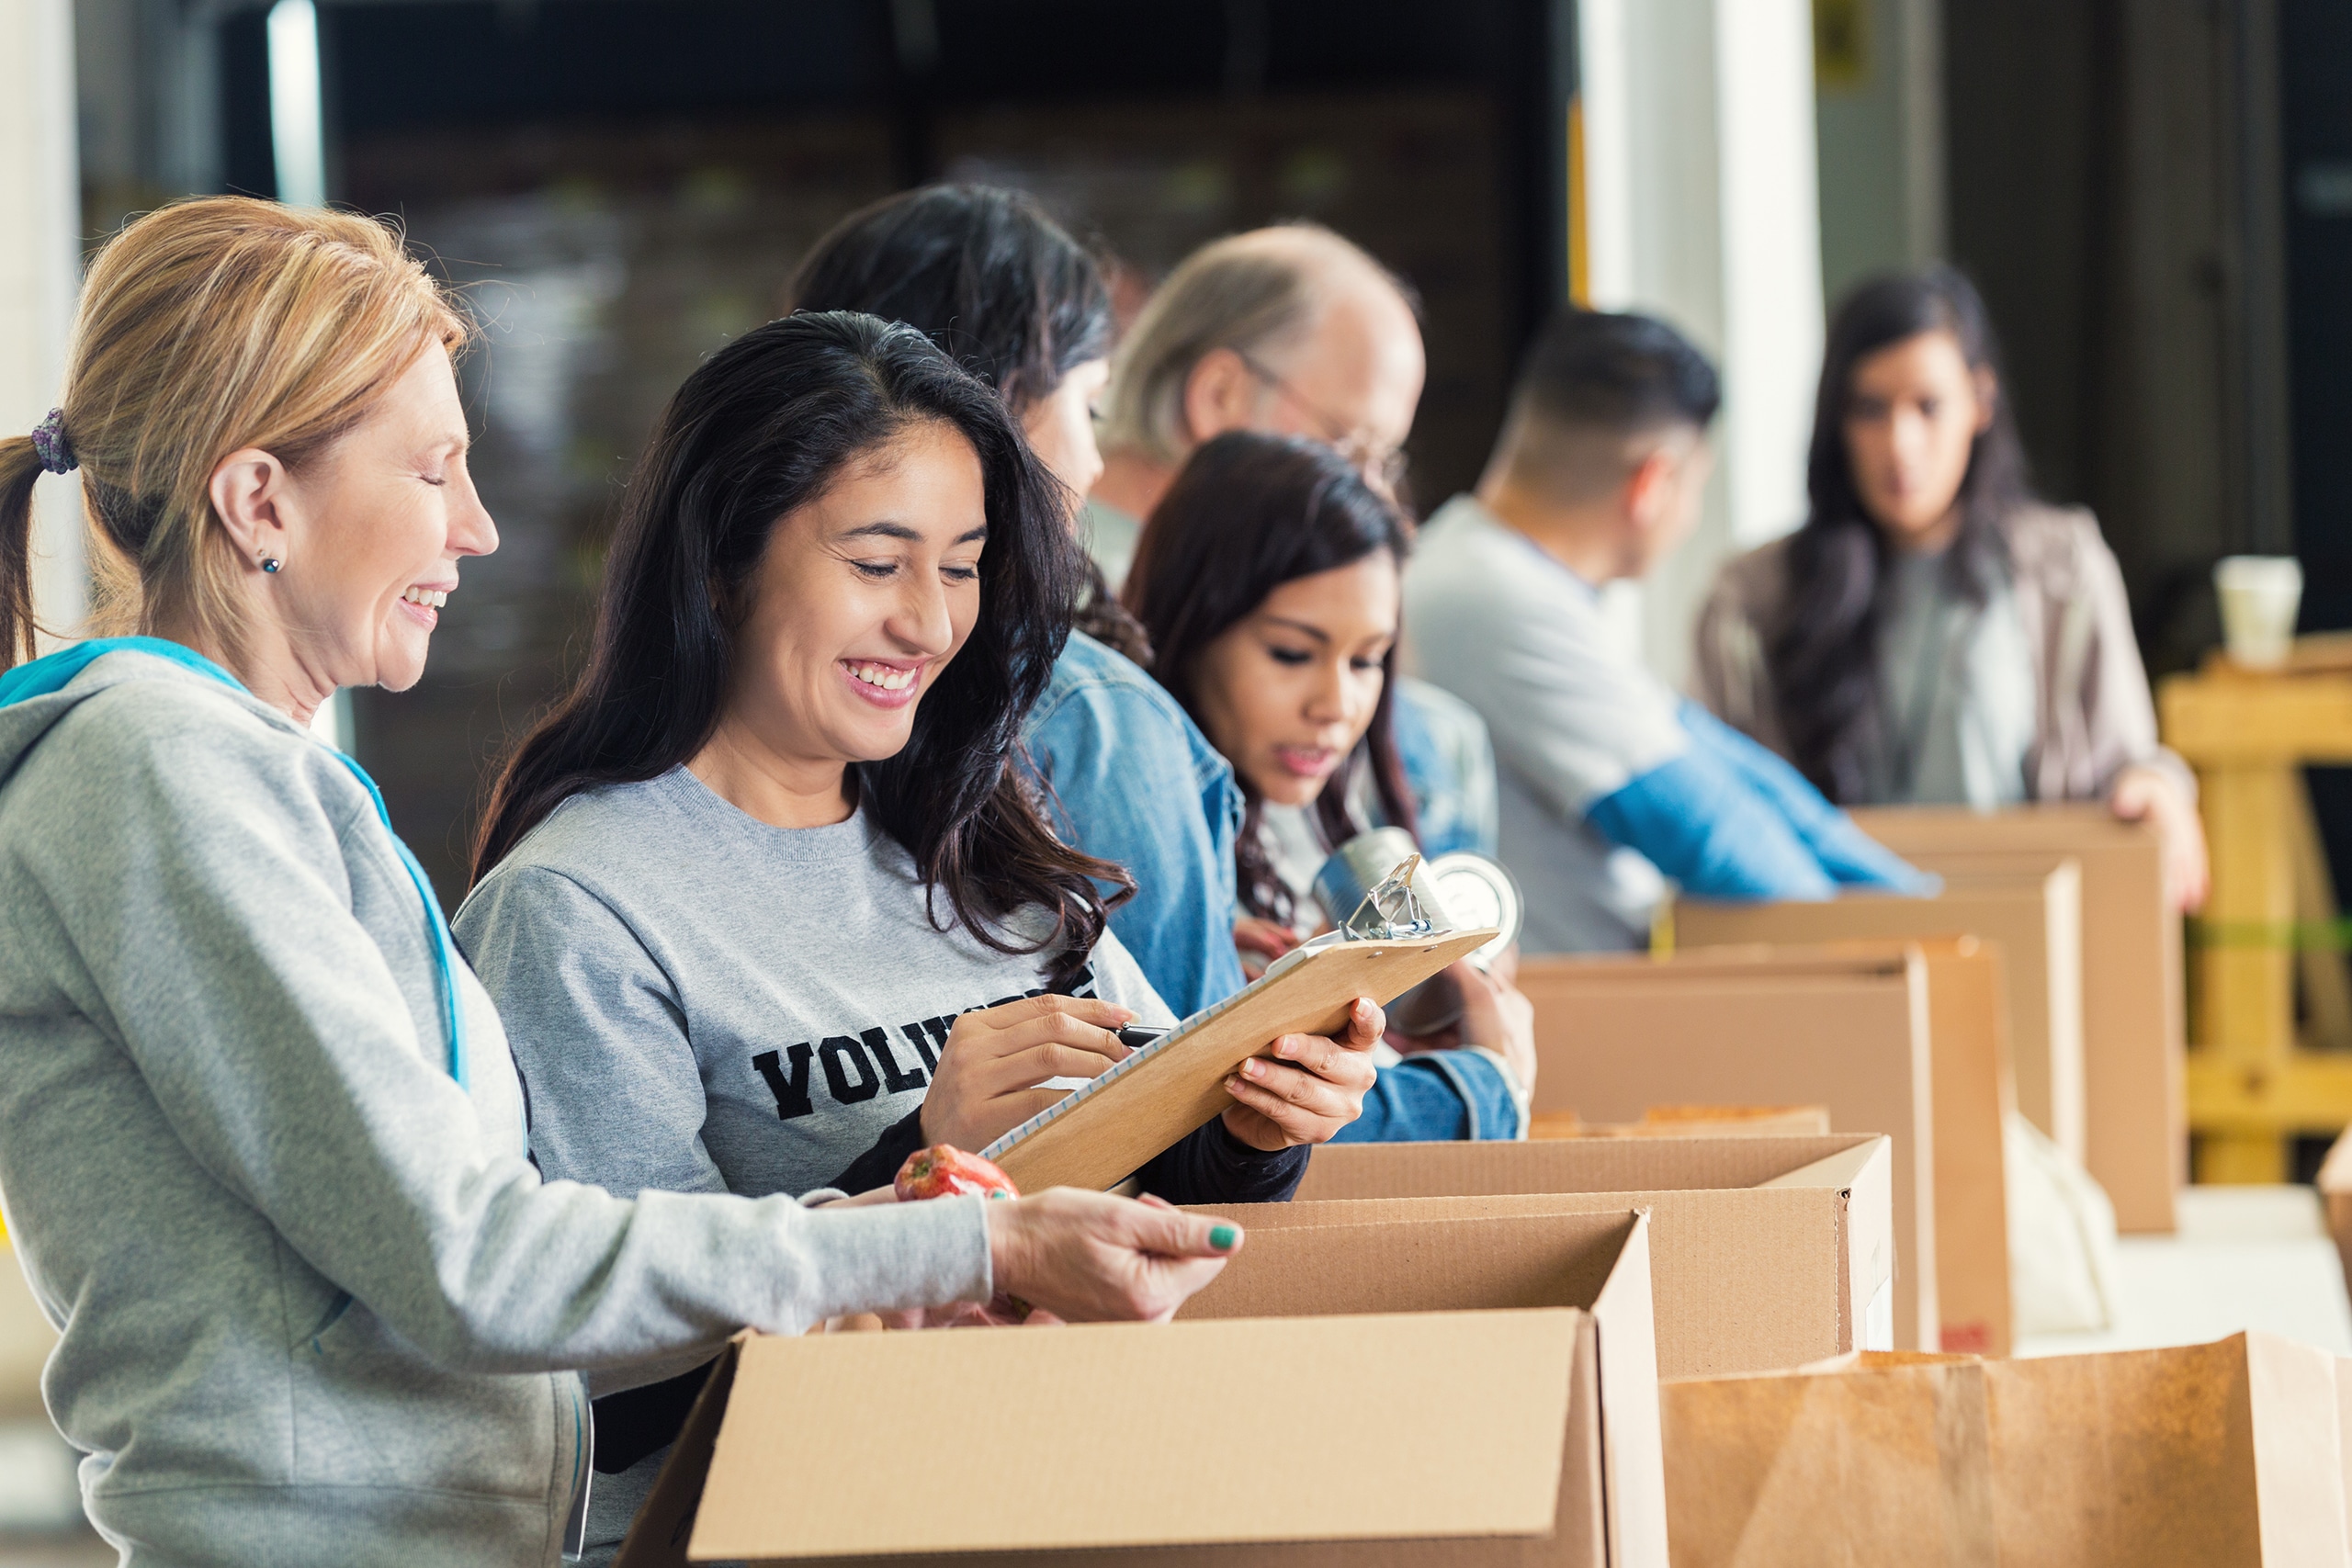 Mature adult Caucasian woman is standing with mid adult Hispanic woman as they pack cardboard boxees full of donated food in charity food bank. Other volunteers are lined up behind them, also sorting donated groceries into boxes. Hispanic woman is writing on checklist on clipboard.